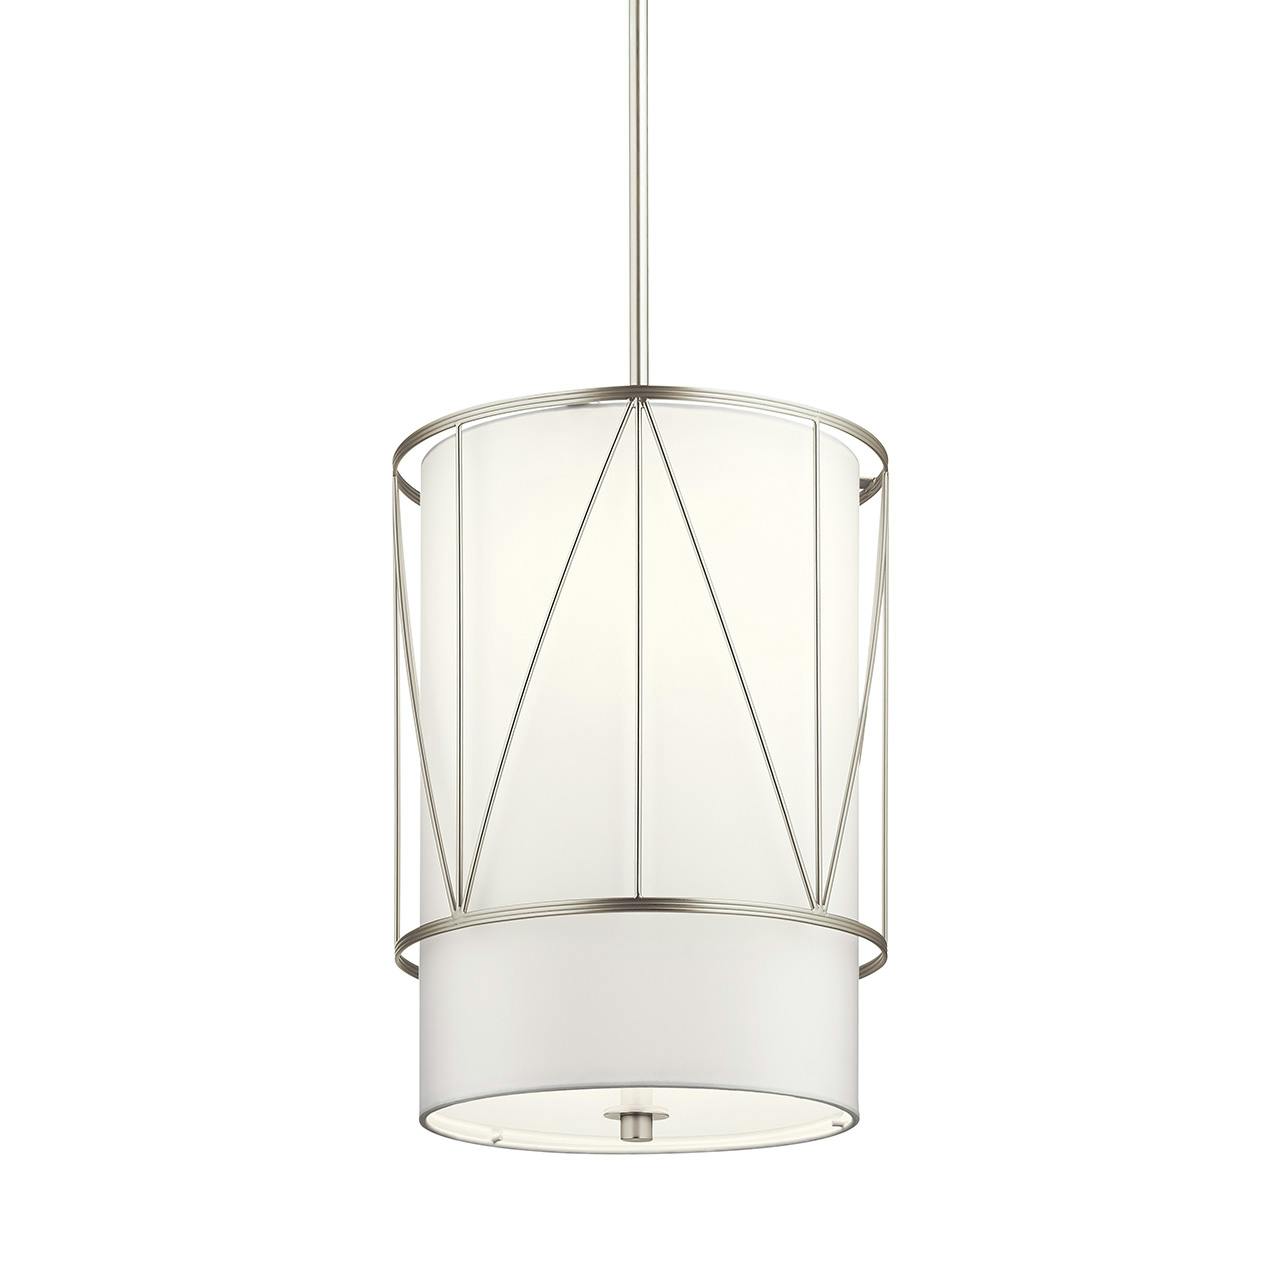 Birkleigh 18.25" Pendant Glass Nickel without the canopy on a white background